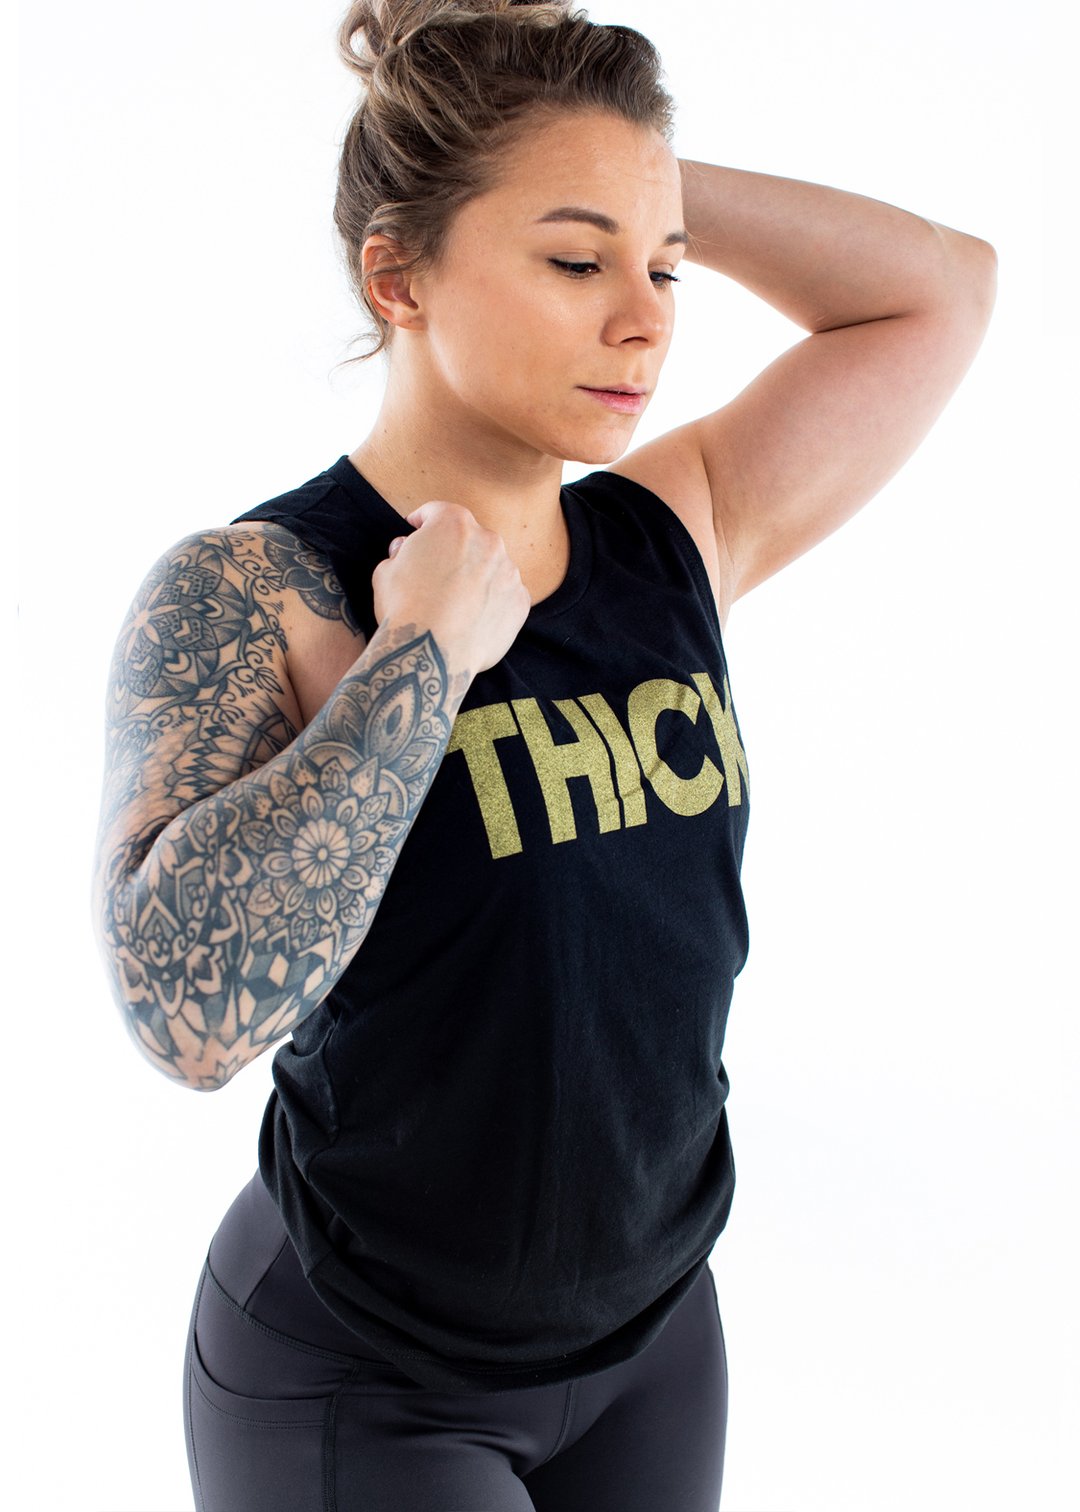 Feed Me Fight Me Women's THICK Muscle Tank (Black) - 9 for 9